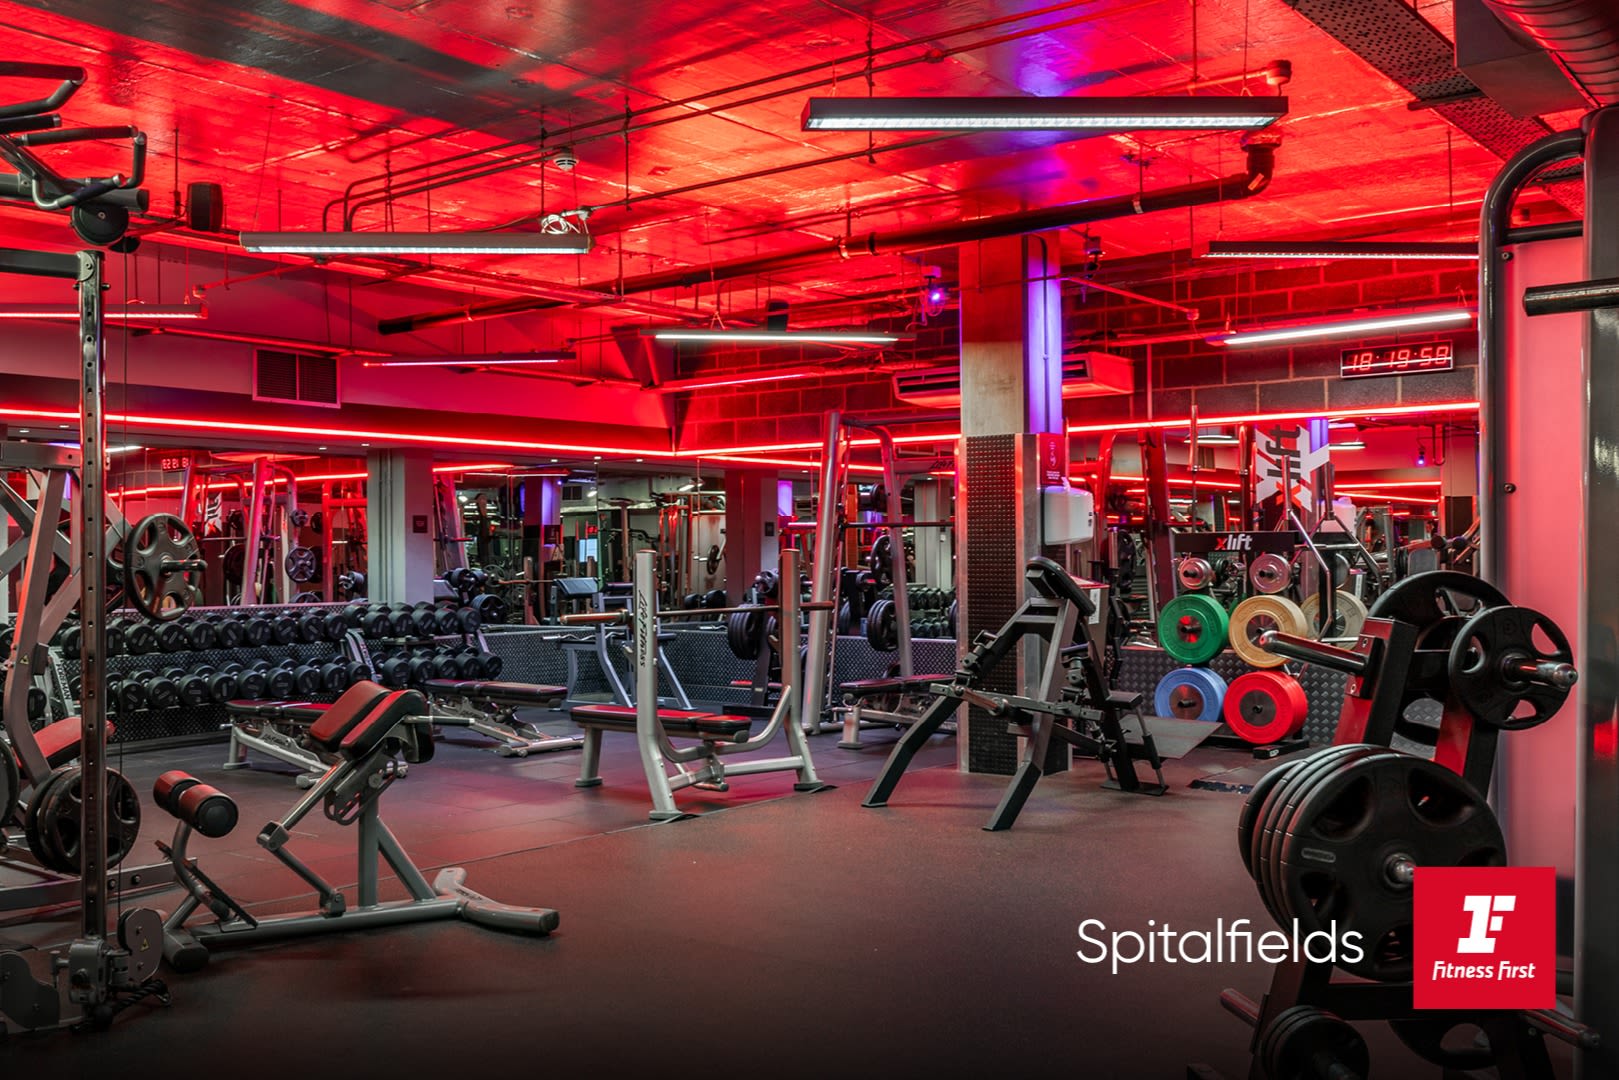 Fitness First - Spitalfields: Read Reviews And Book Classes On Classpass